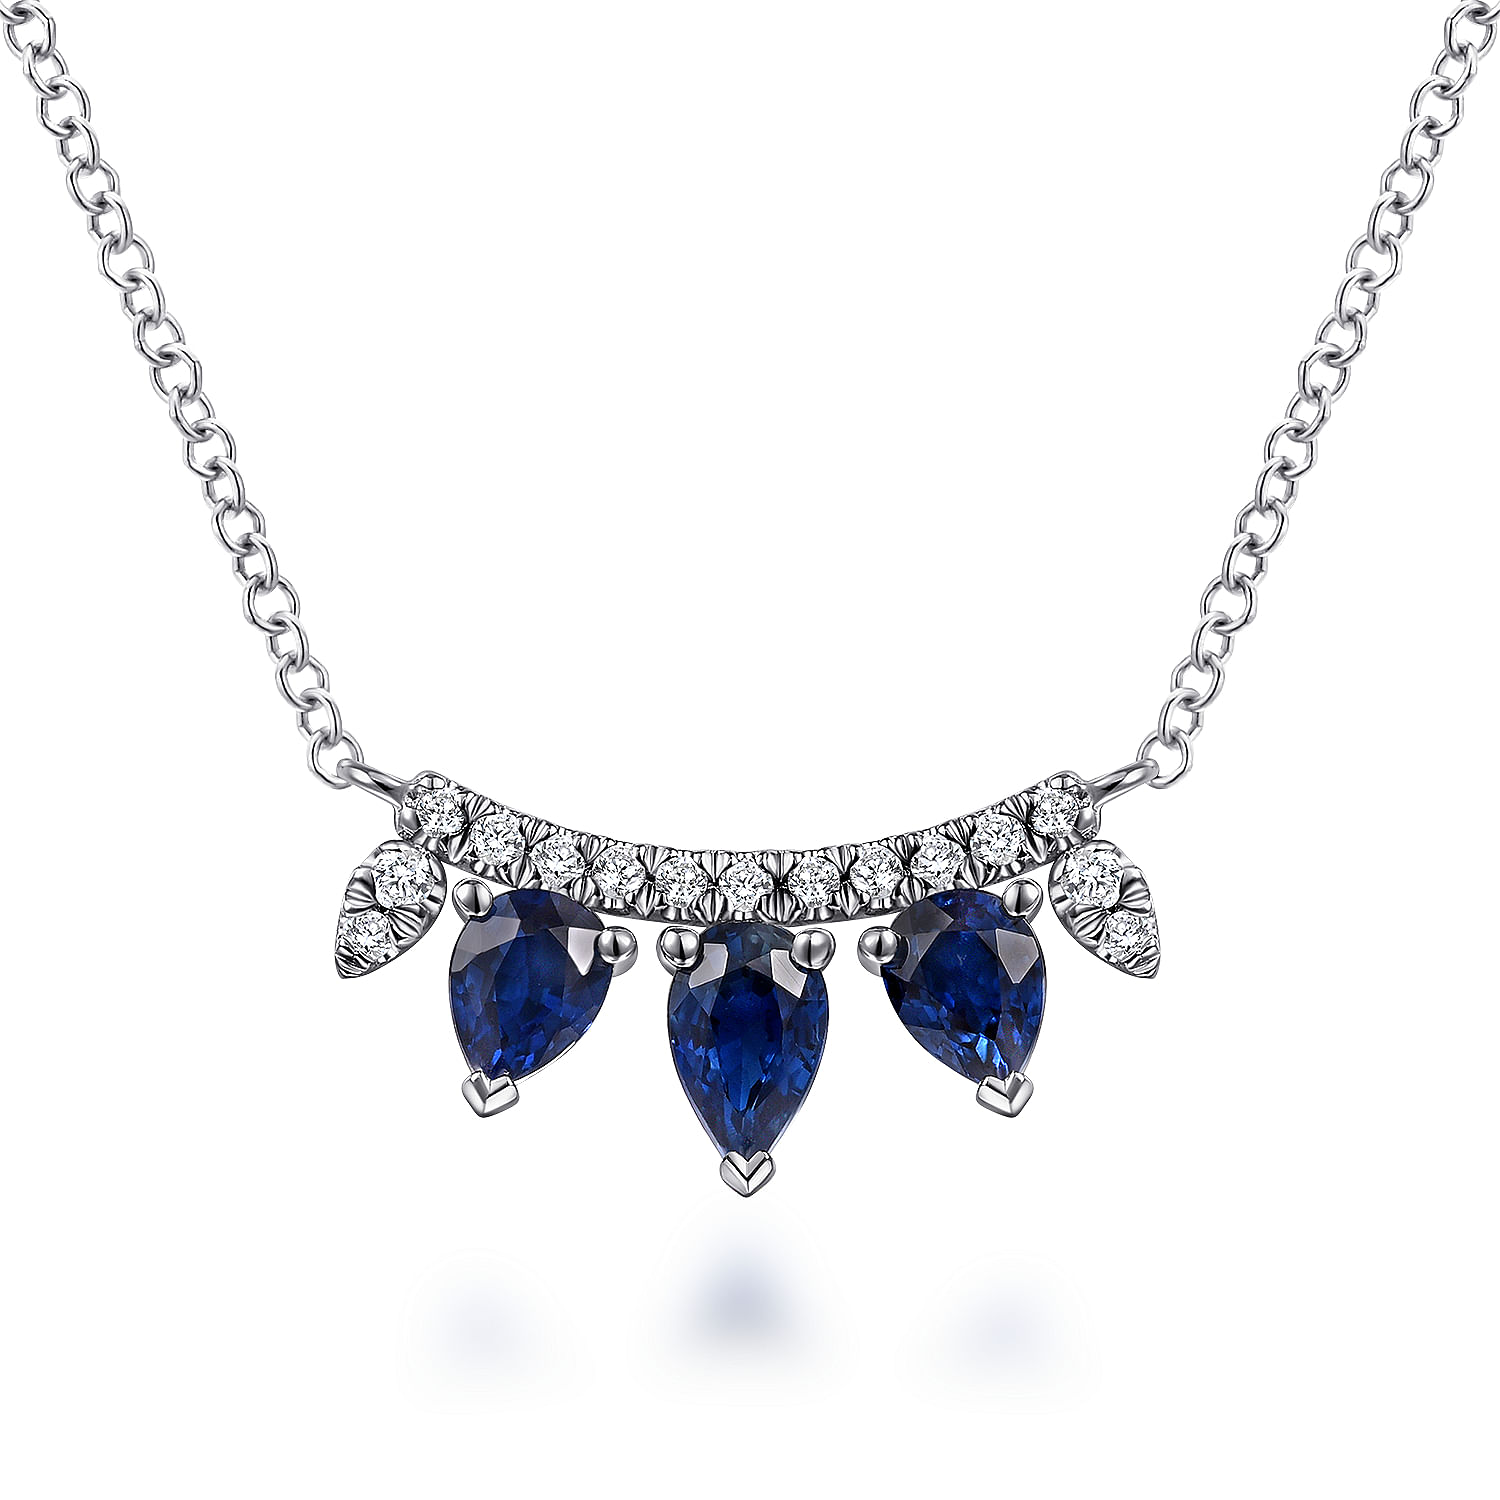 Gabriel - 14K White Gold Pear Shaped Sapphire and Diamond Bar Pendant Necklace